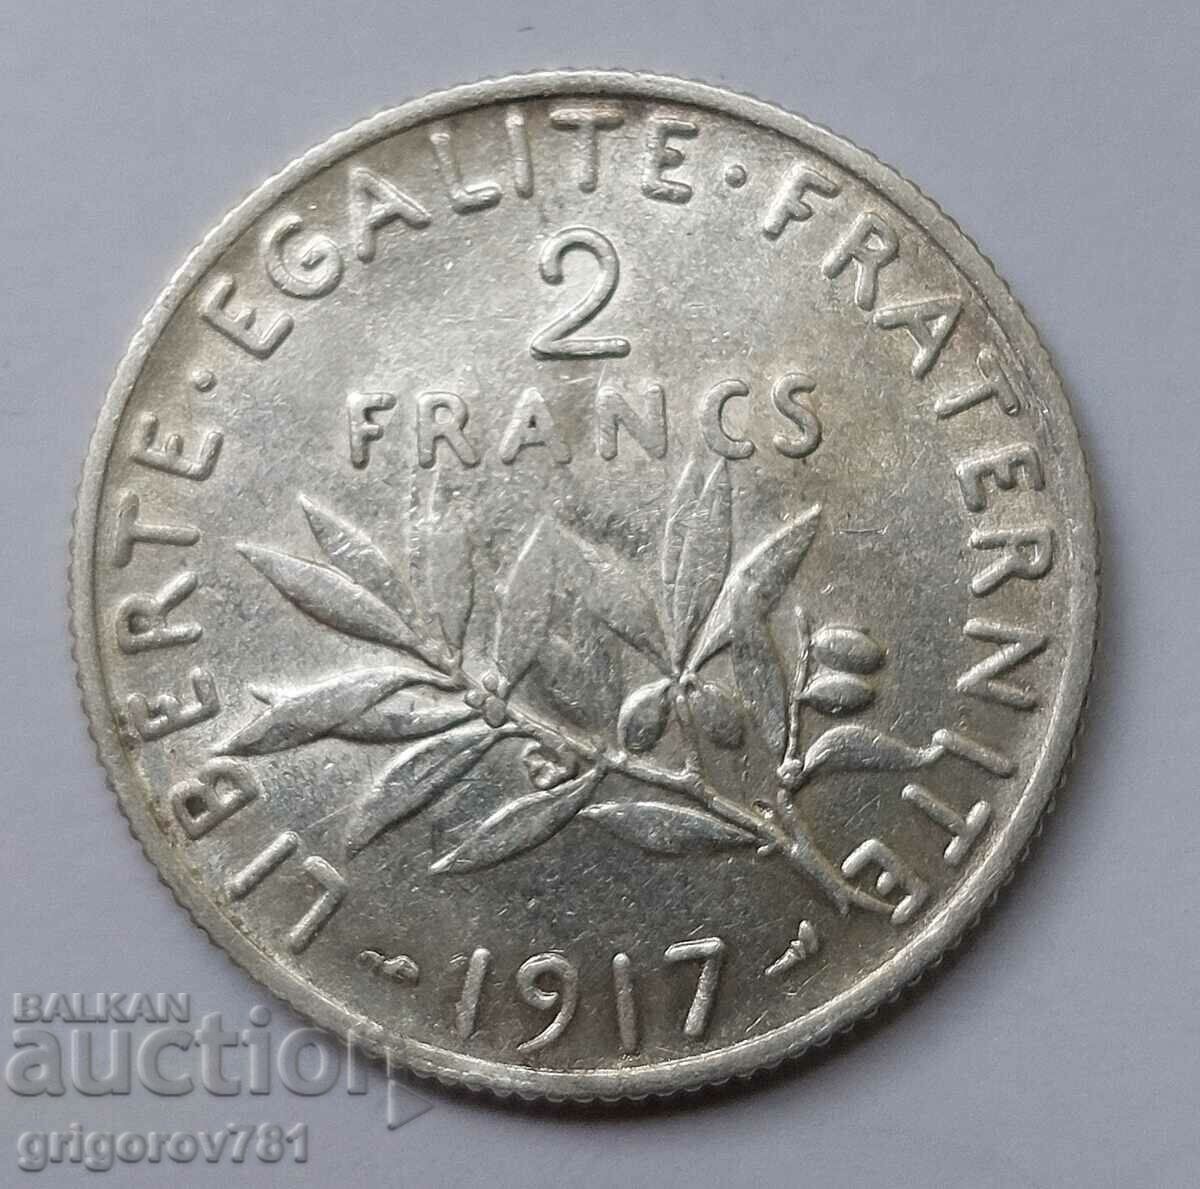 2 Francs Silver France 1917 - Silver Coin #46